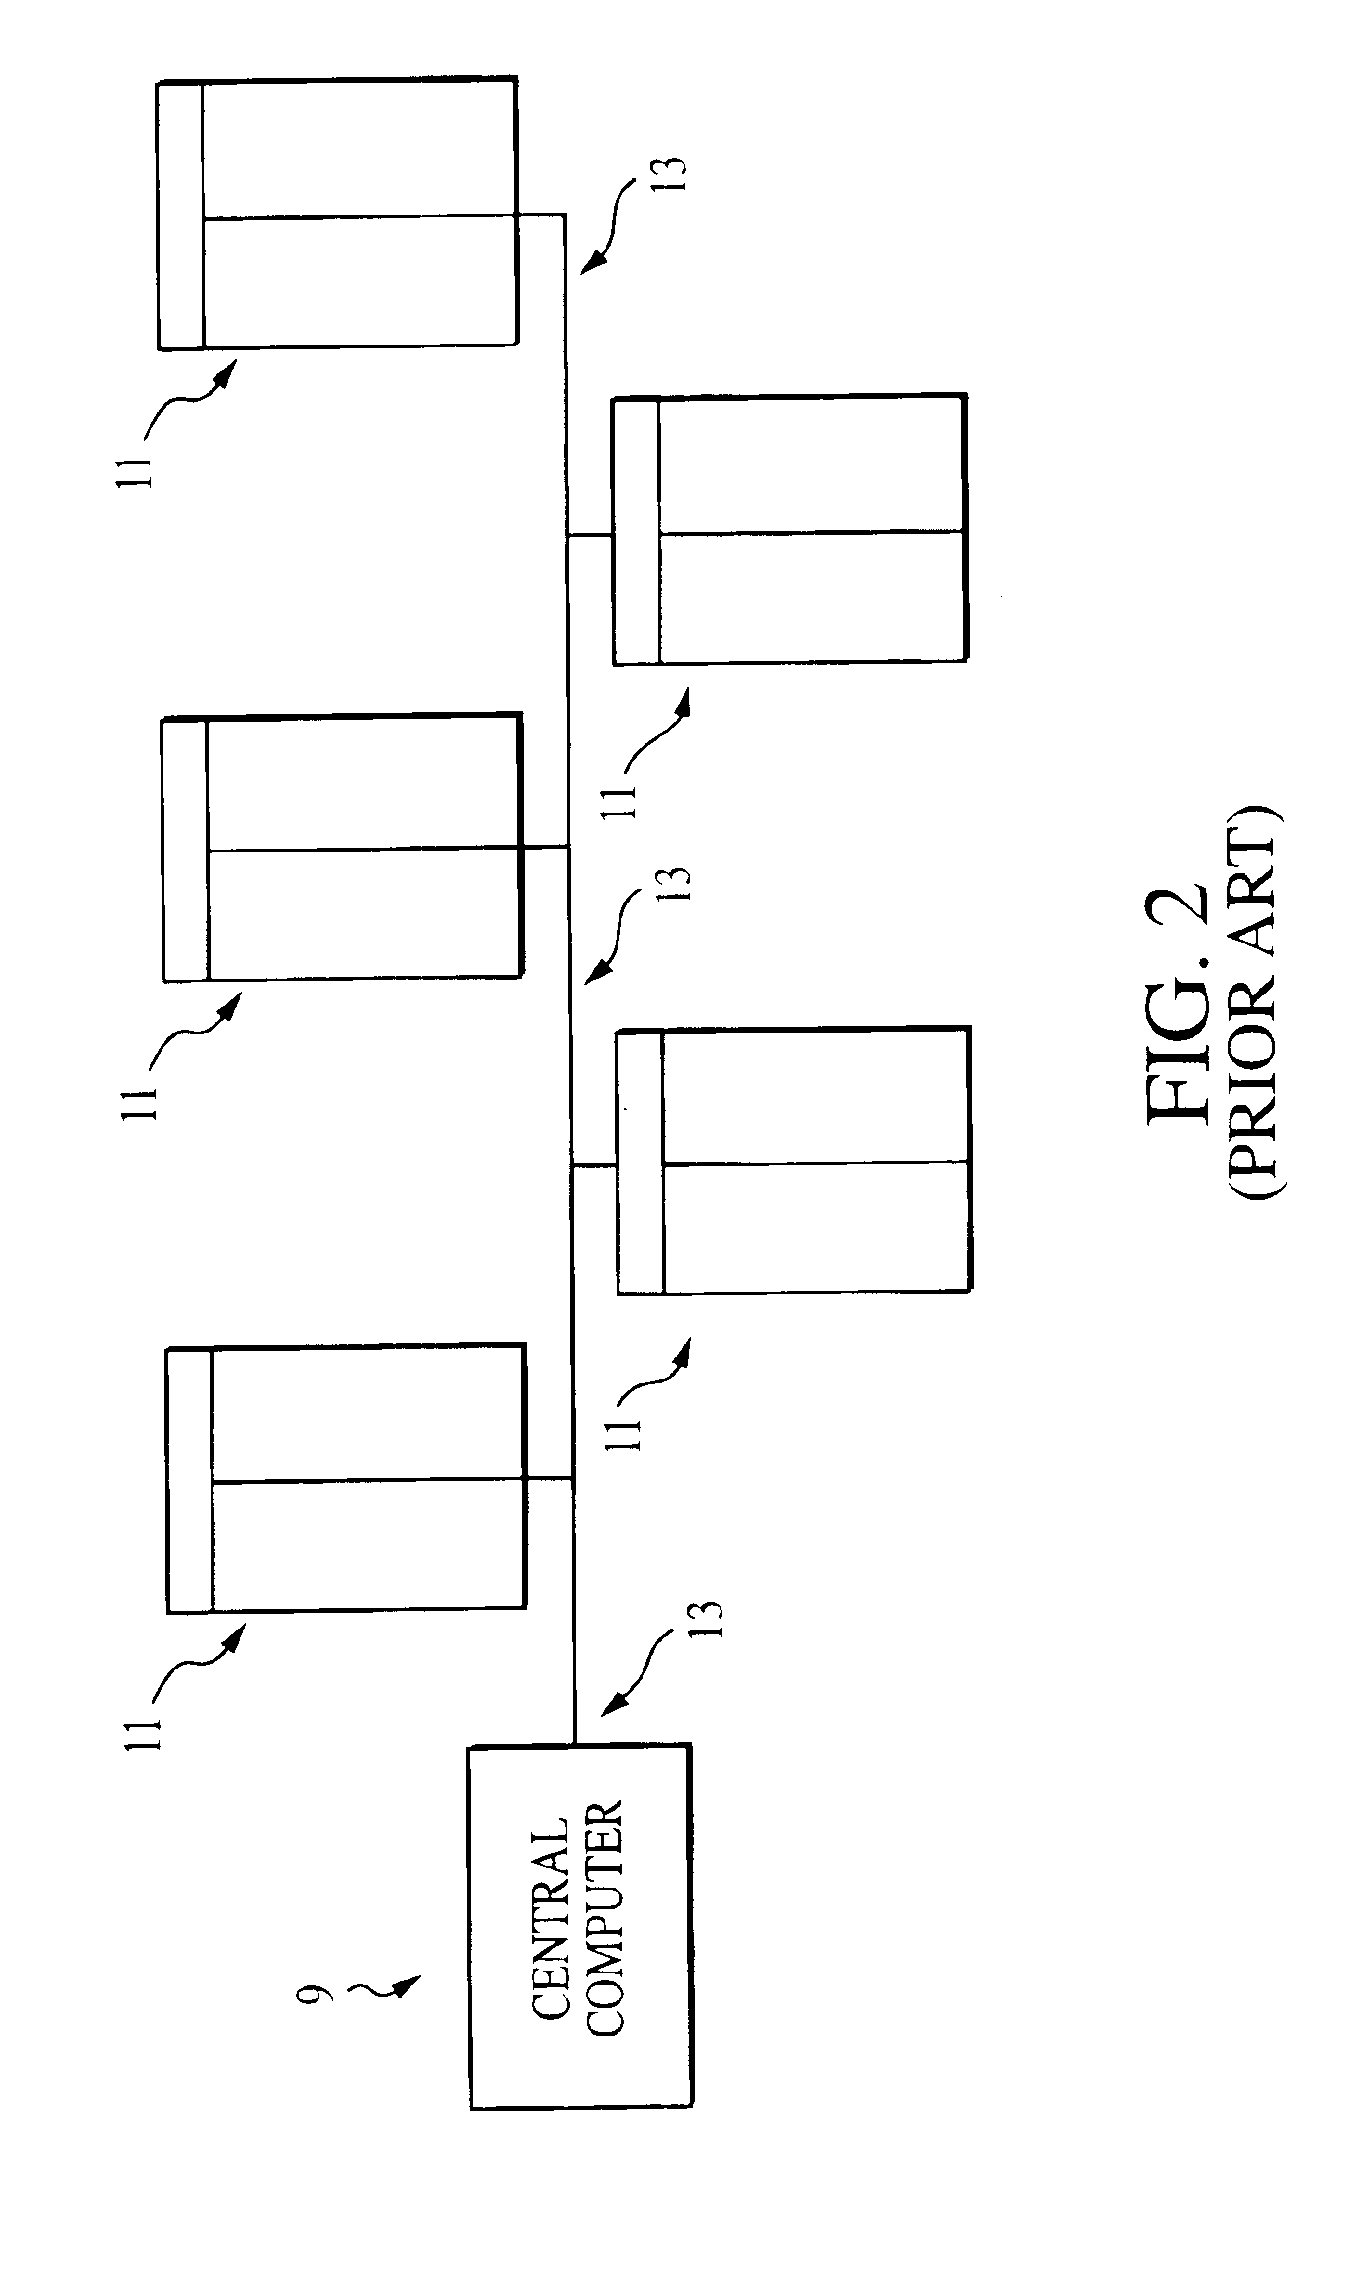 Distributed control network for irrigation management